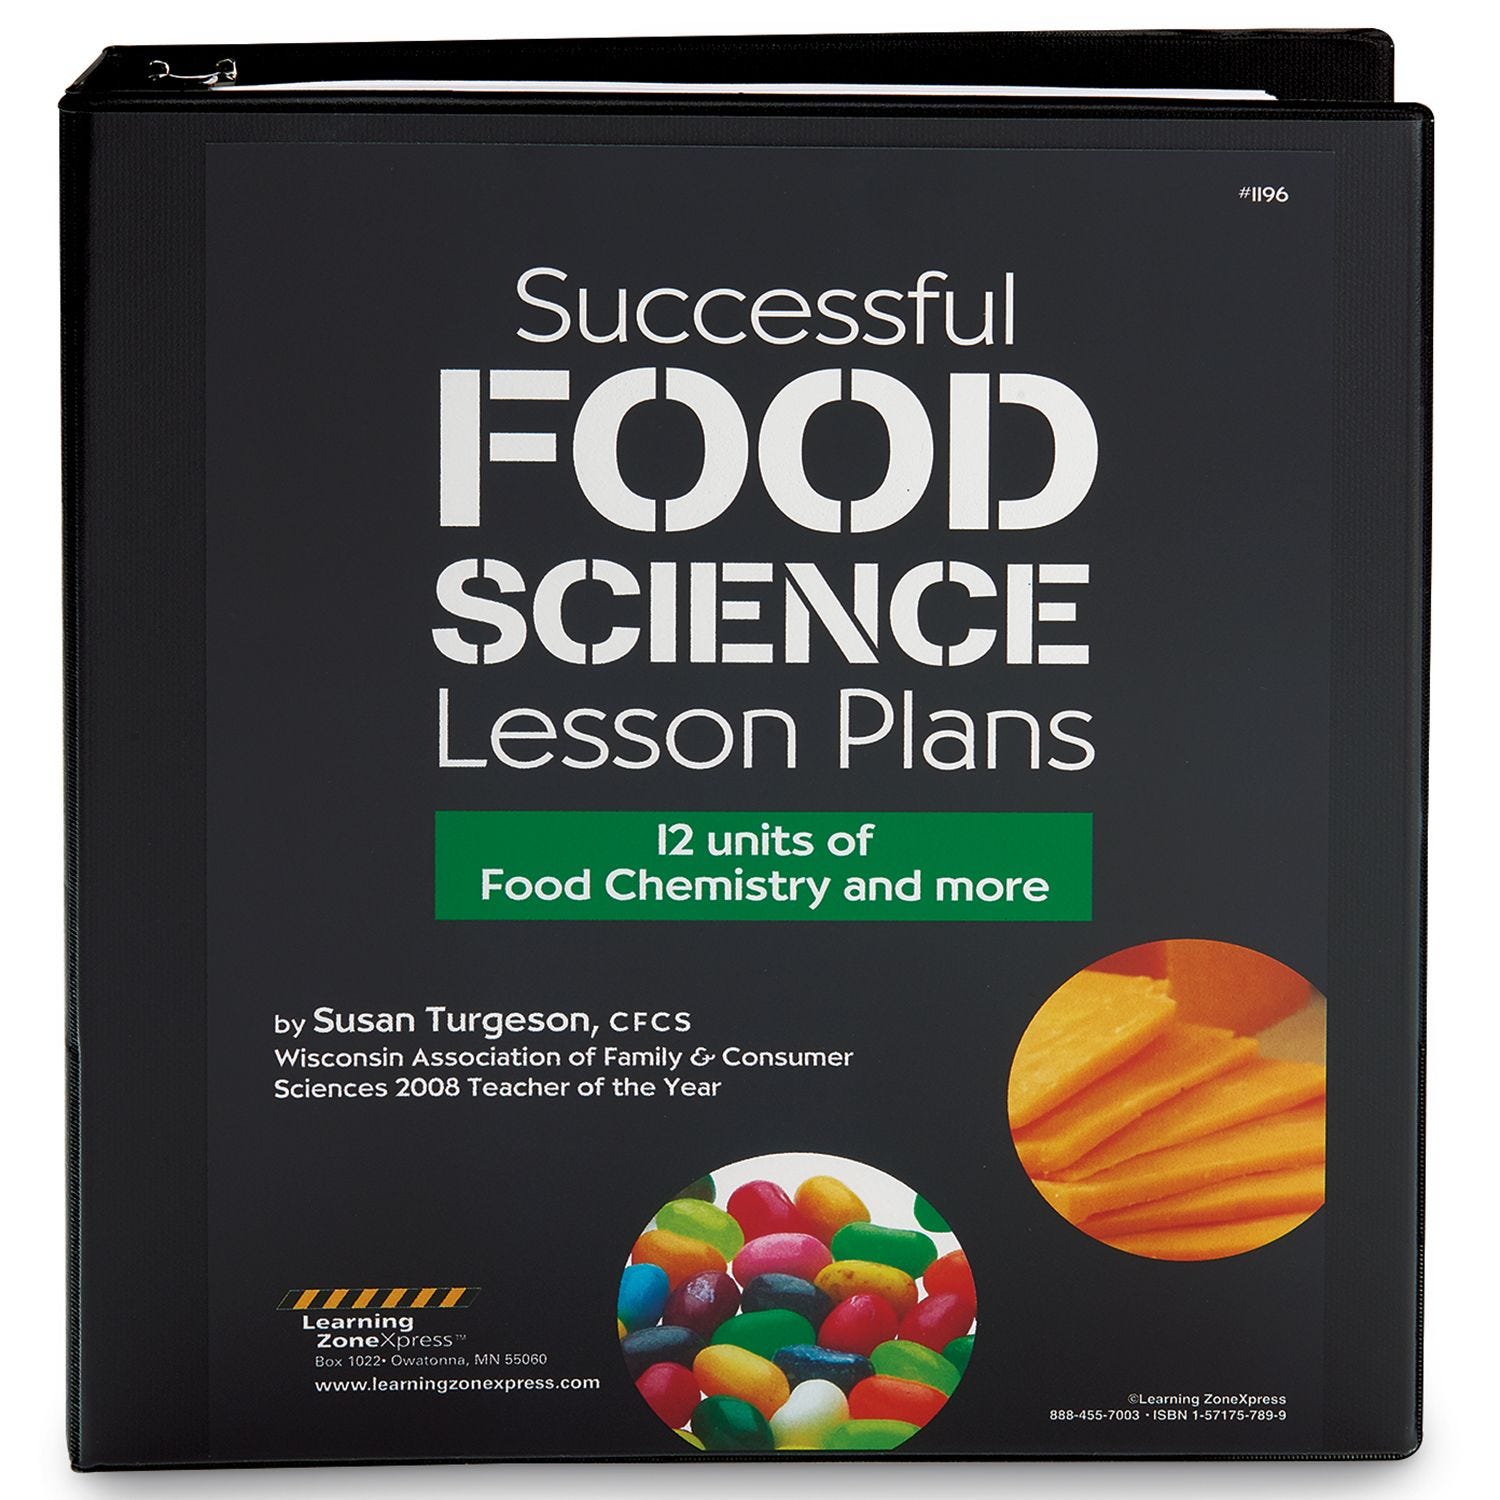 What Is Food Science, And Why Is Food Science Important?